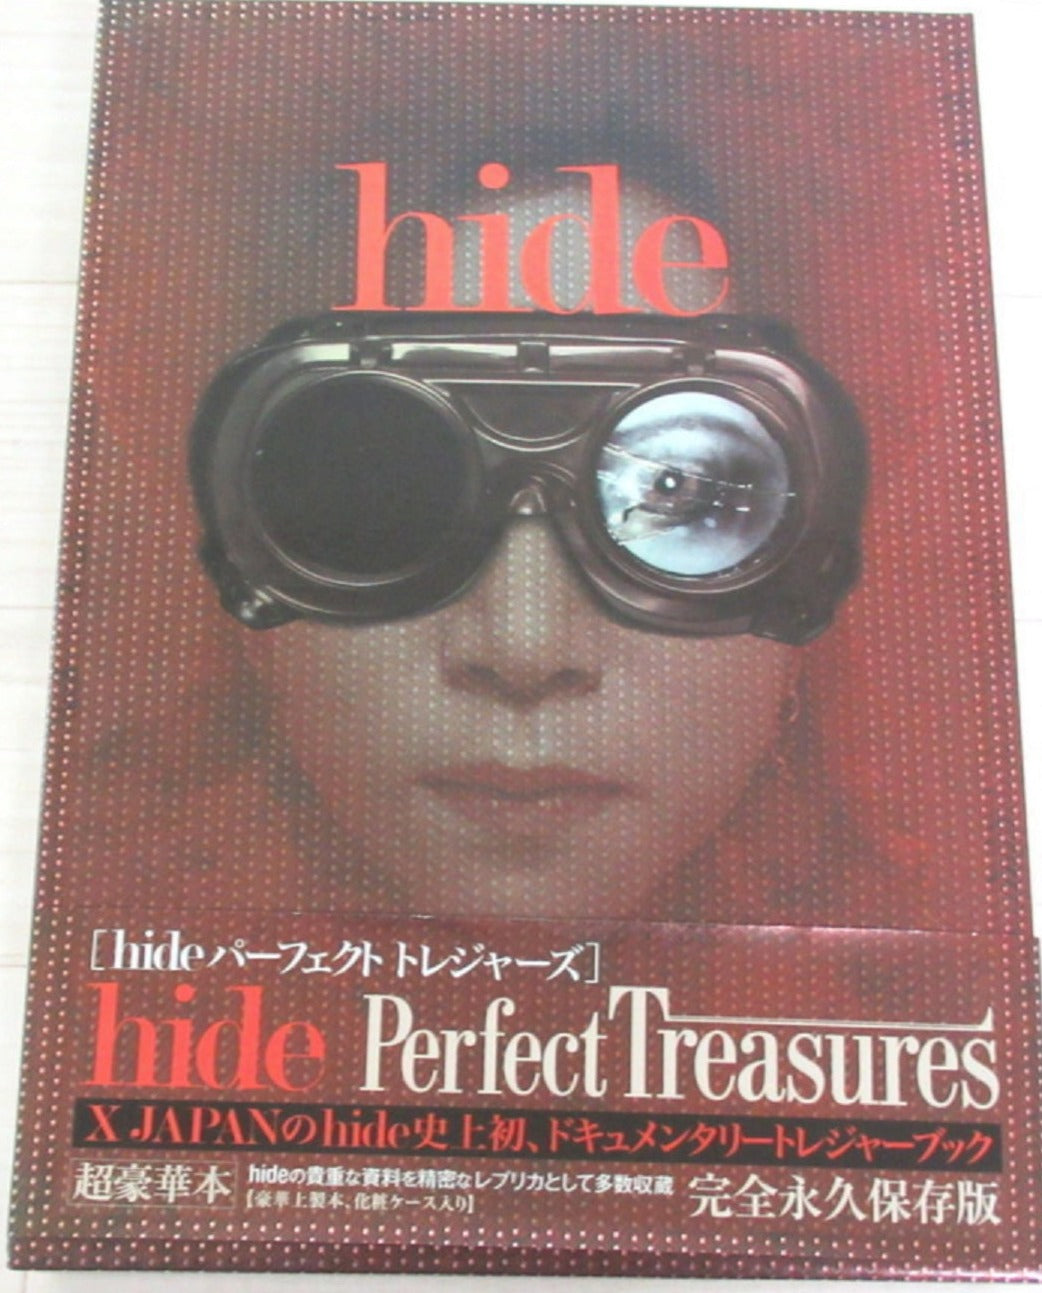 hide ( X Japan, Zilch) - Perfect Treasures Large Collector Book